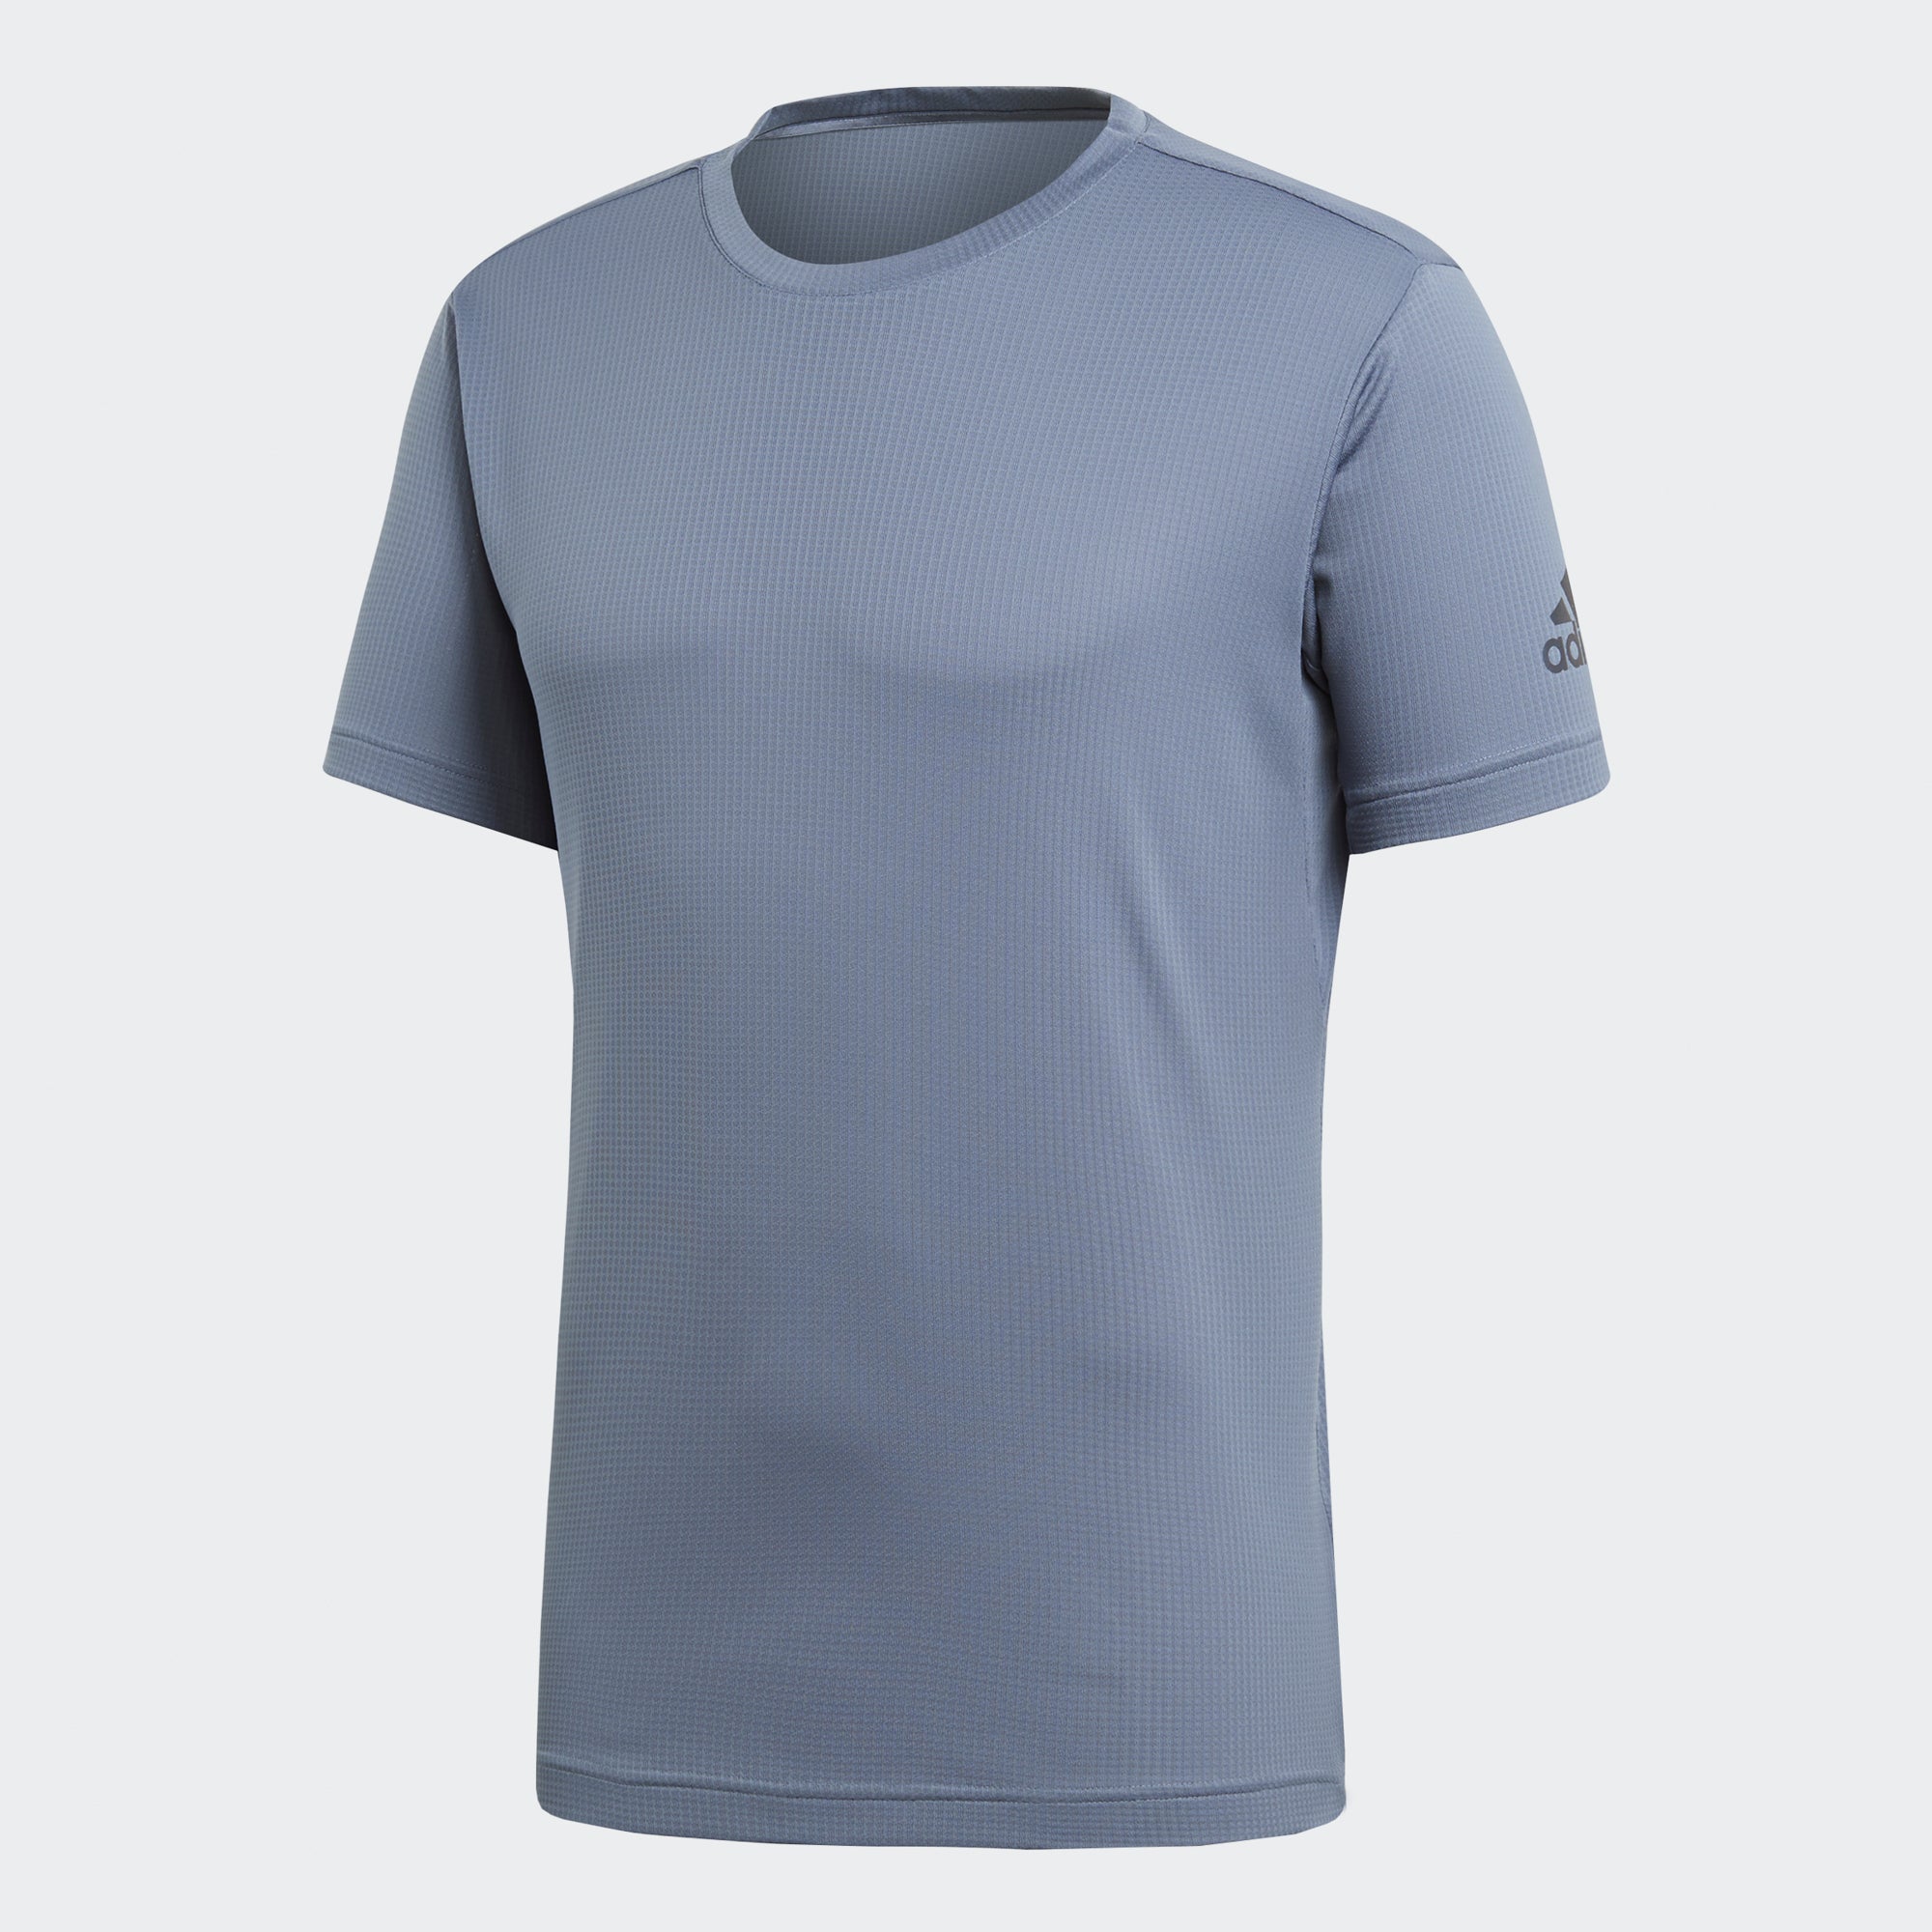 Buy adidas Men Freelift Climachill Tee, Raw Steel Online in Singapore |  Royal Sporting House